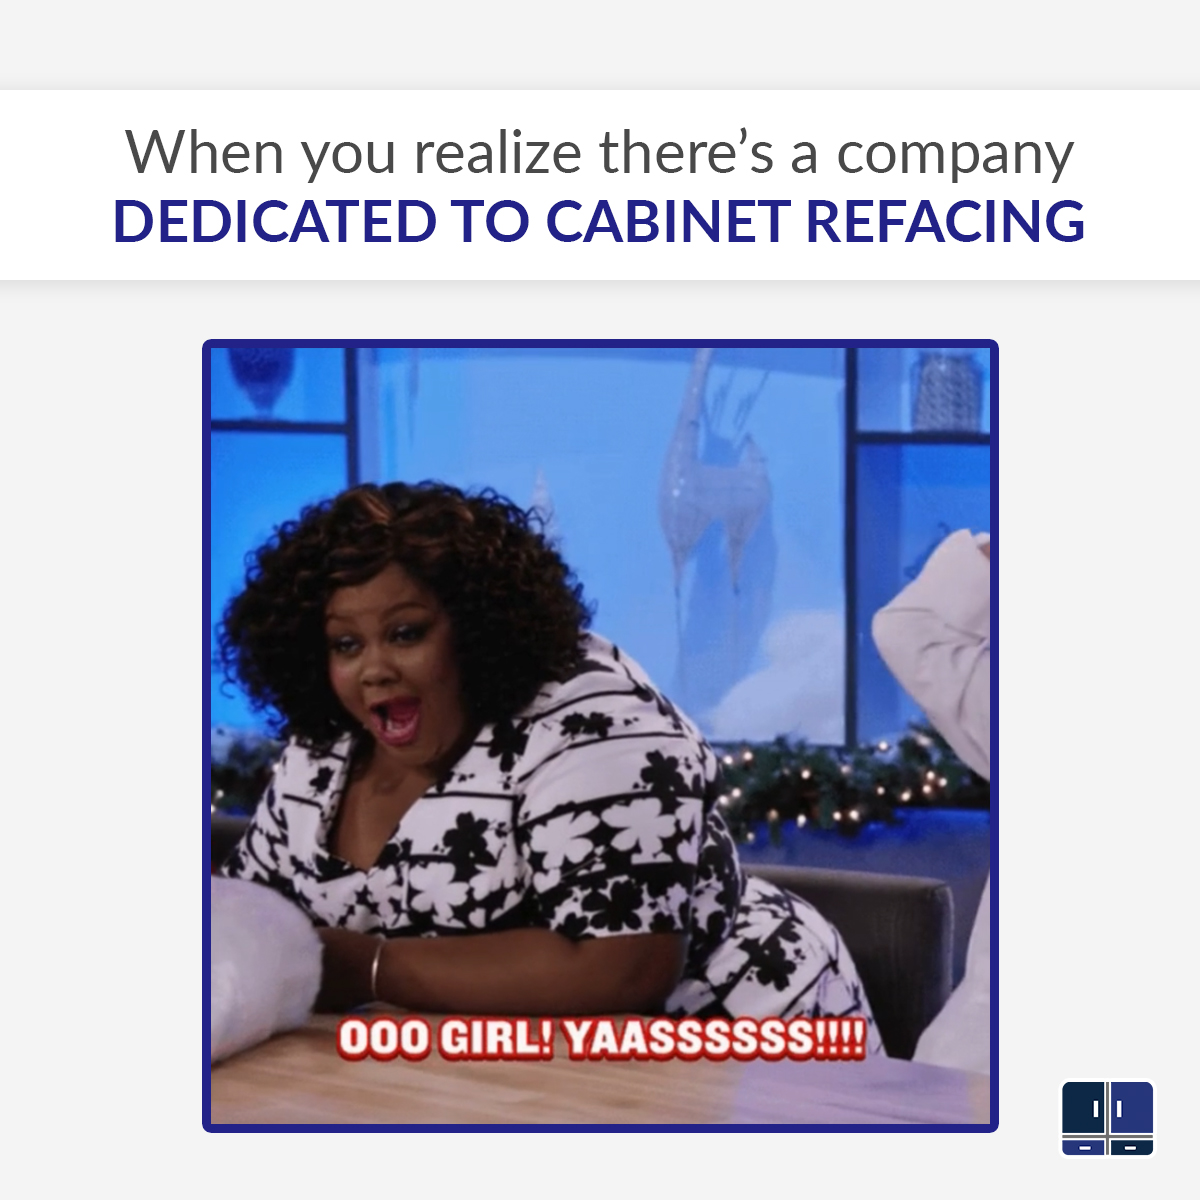 When You Realize There's a Company Dedicated to Cabinet Refacing